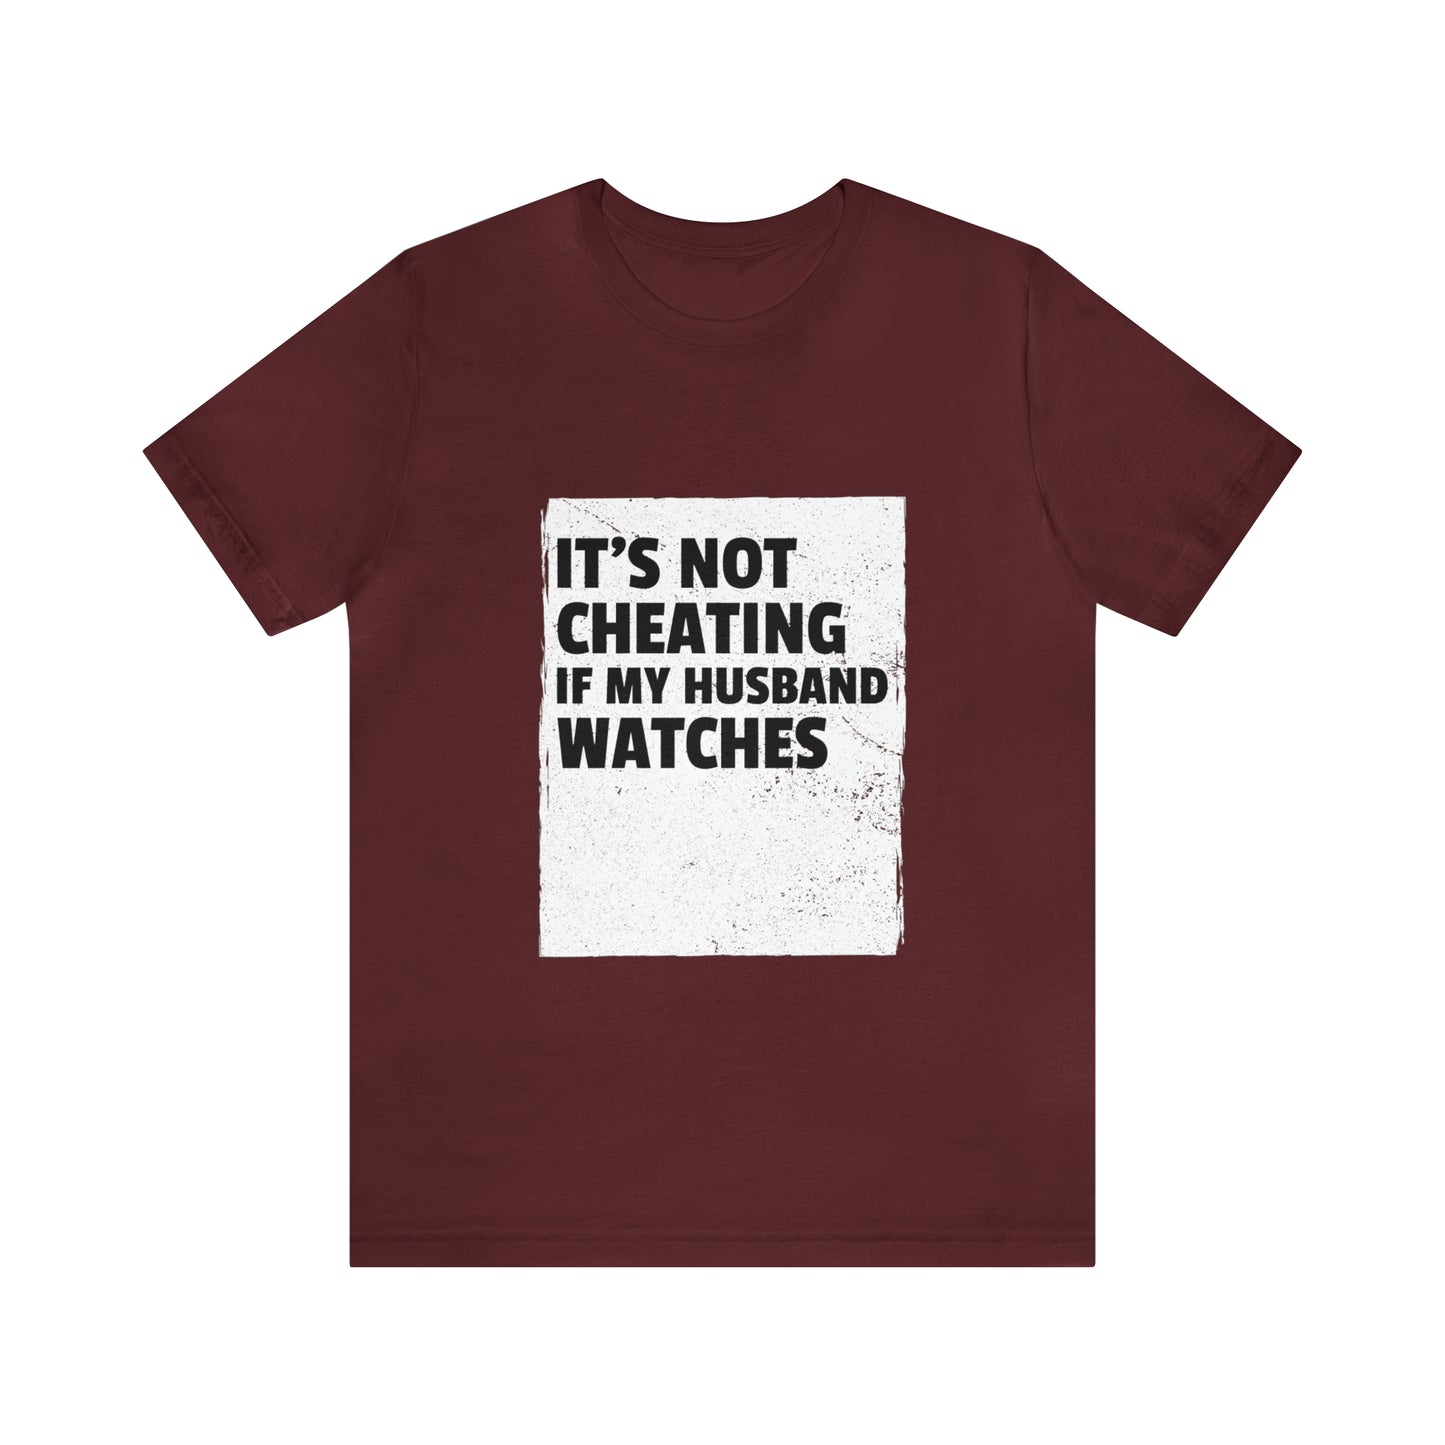 It's Not Cheating If My Husband Watches - Unisex T-Shirt